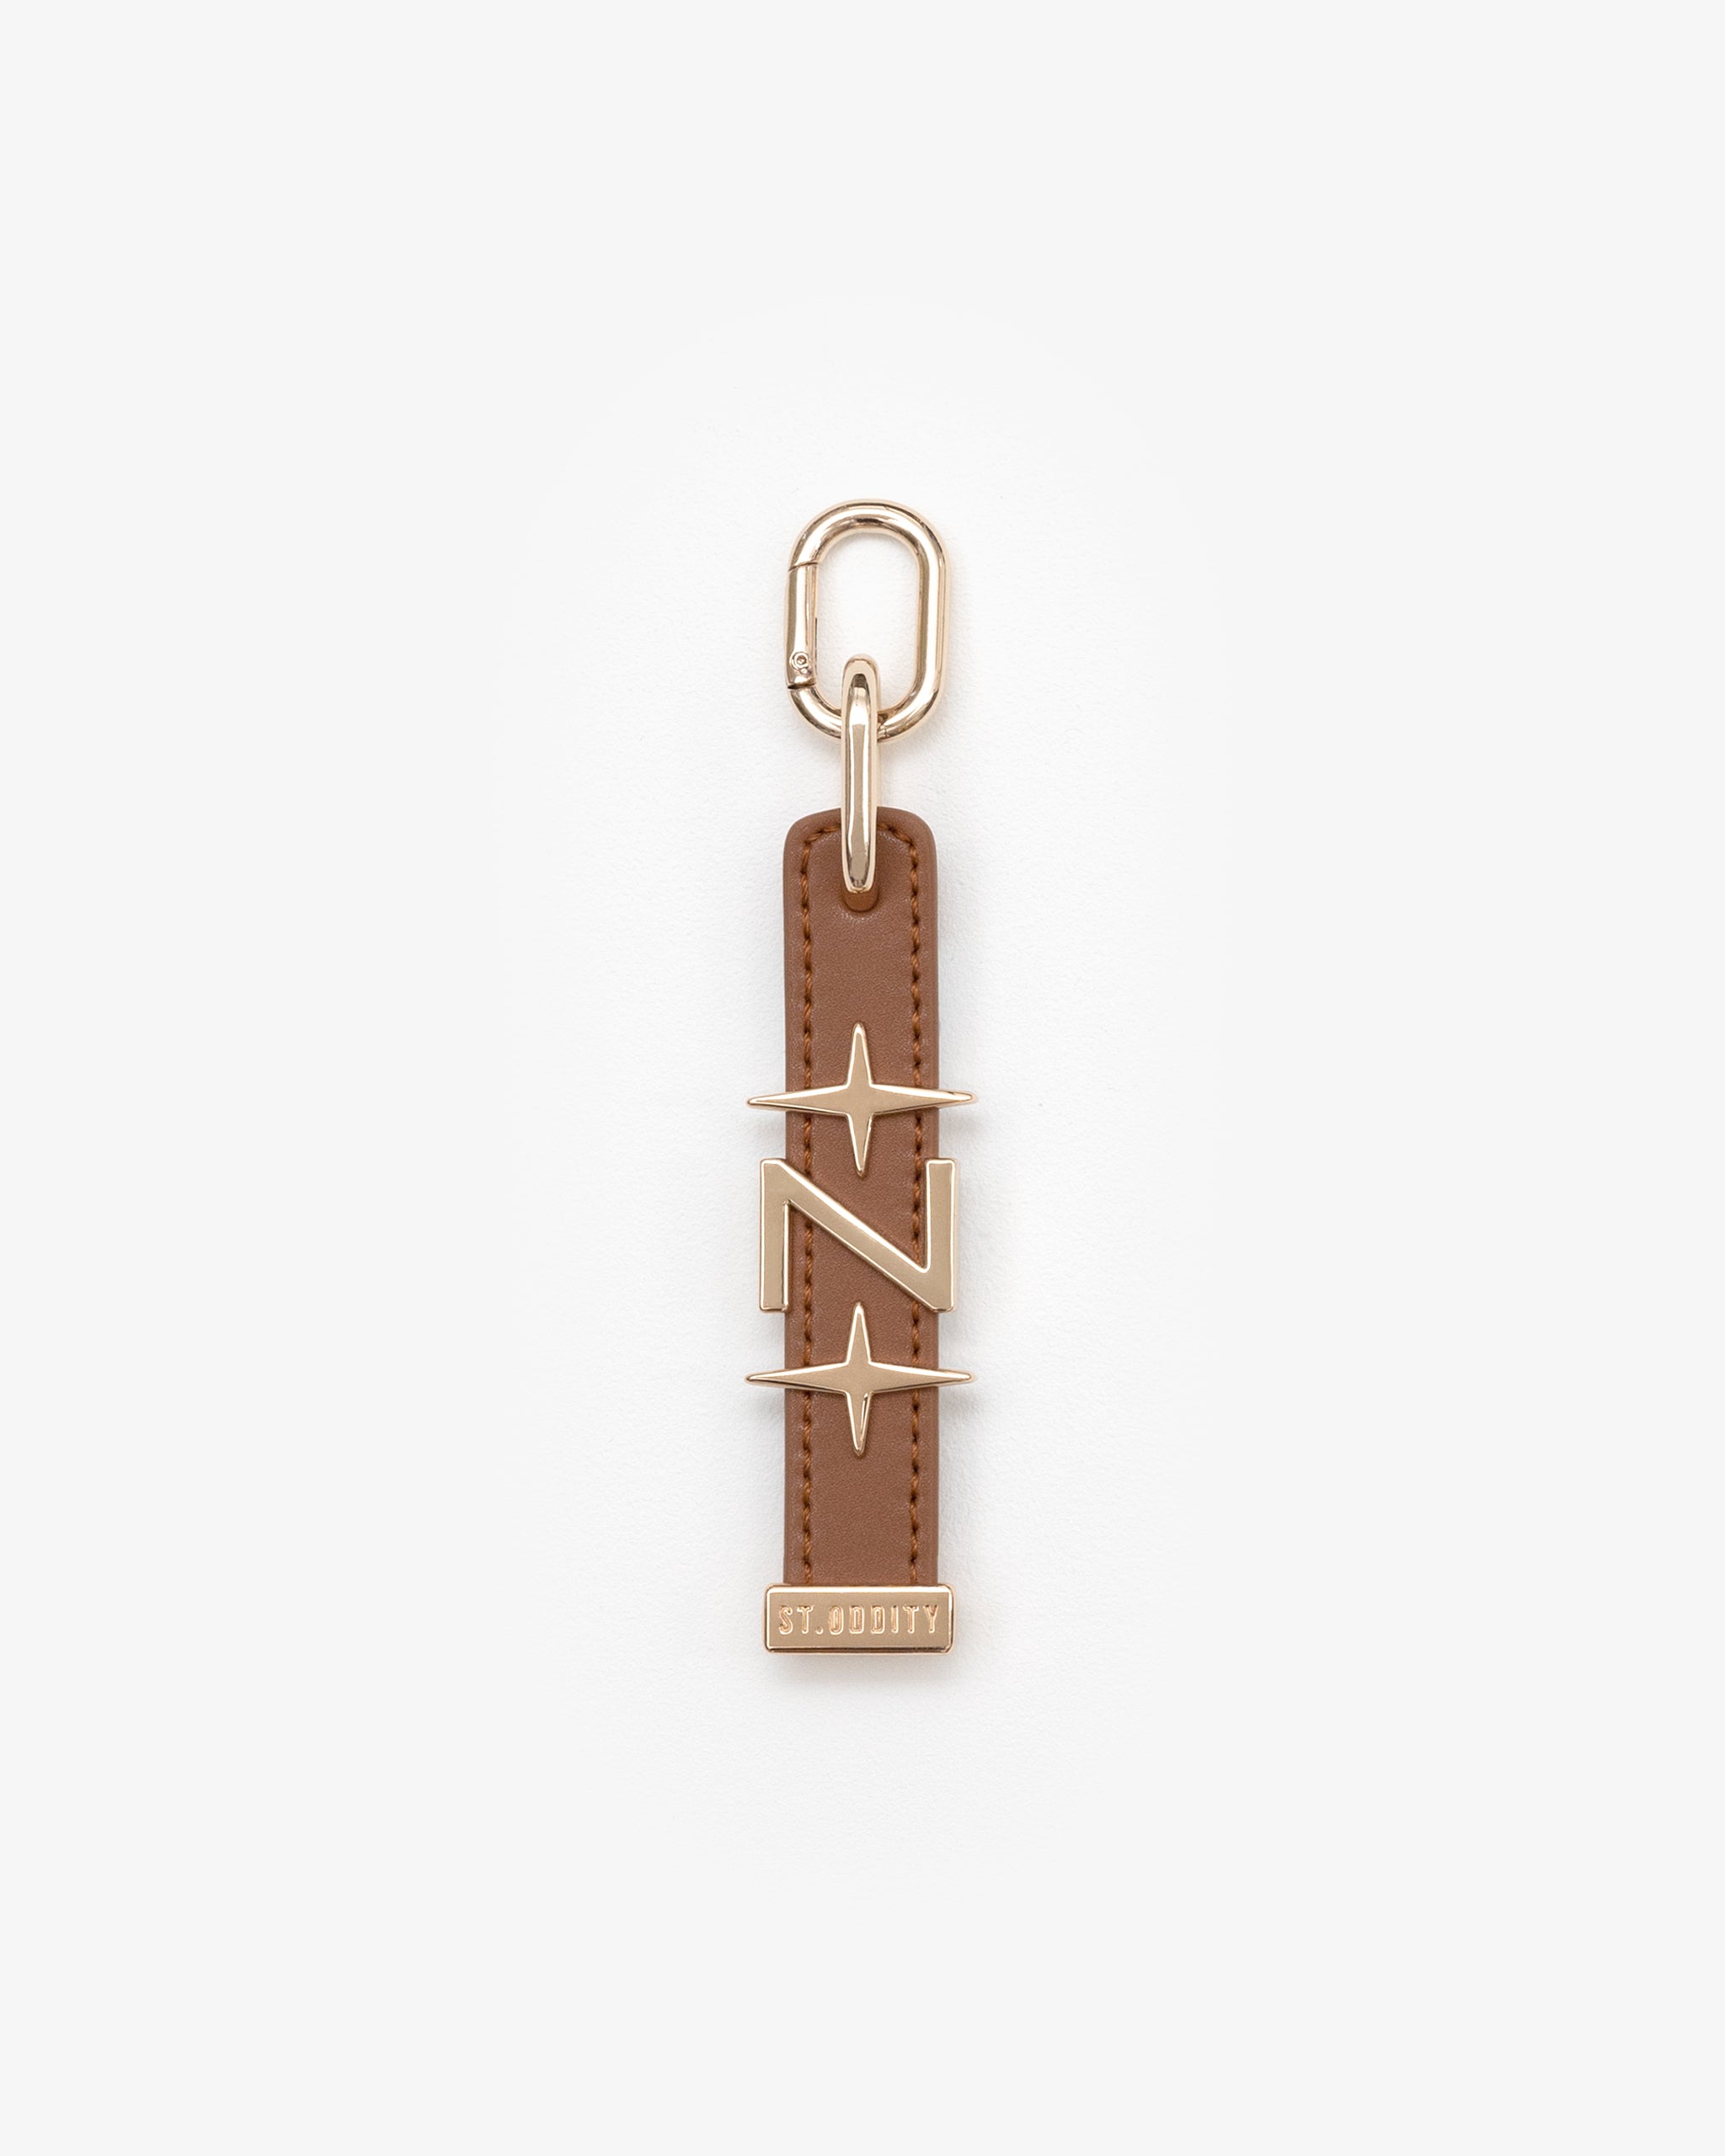 Pre-order (Mid-May): Charm in Tan with Personalised Hardware